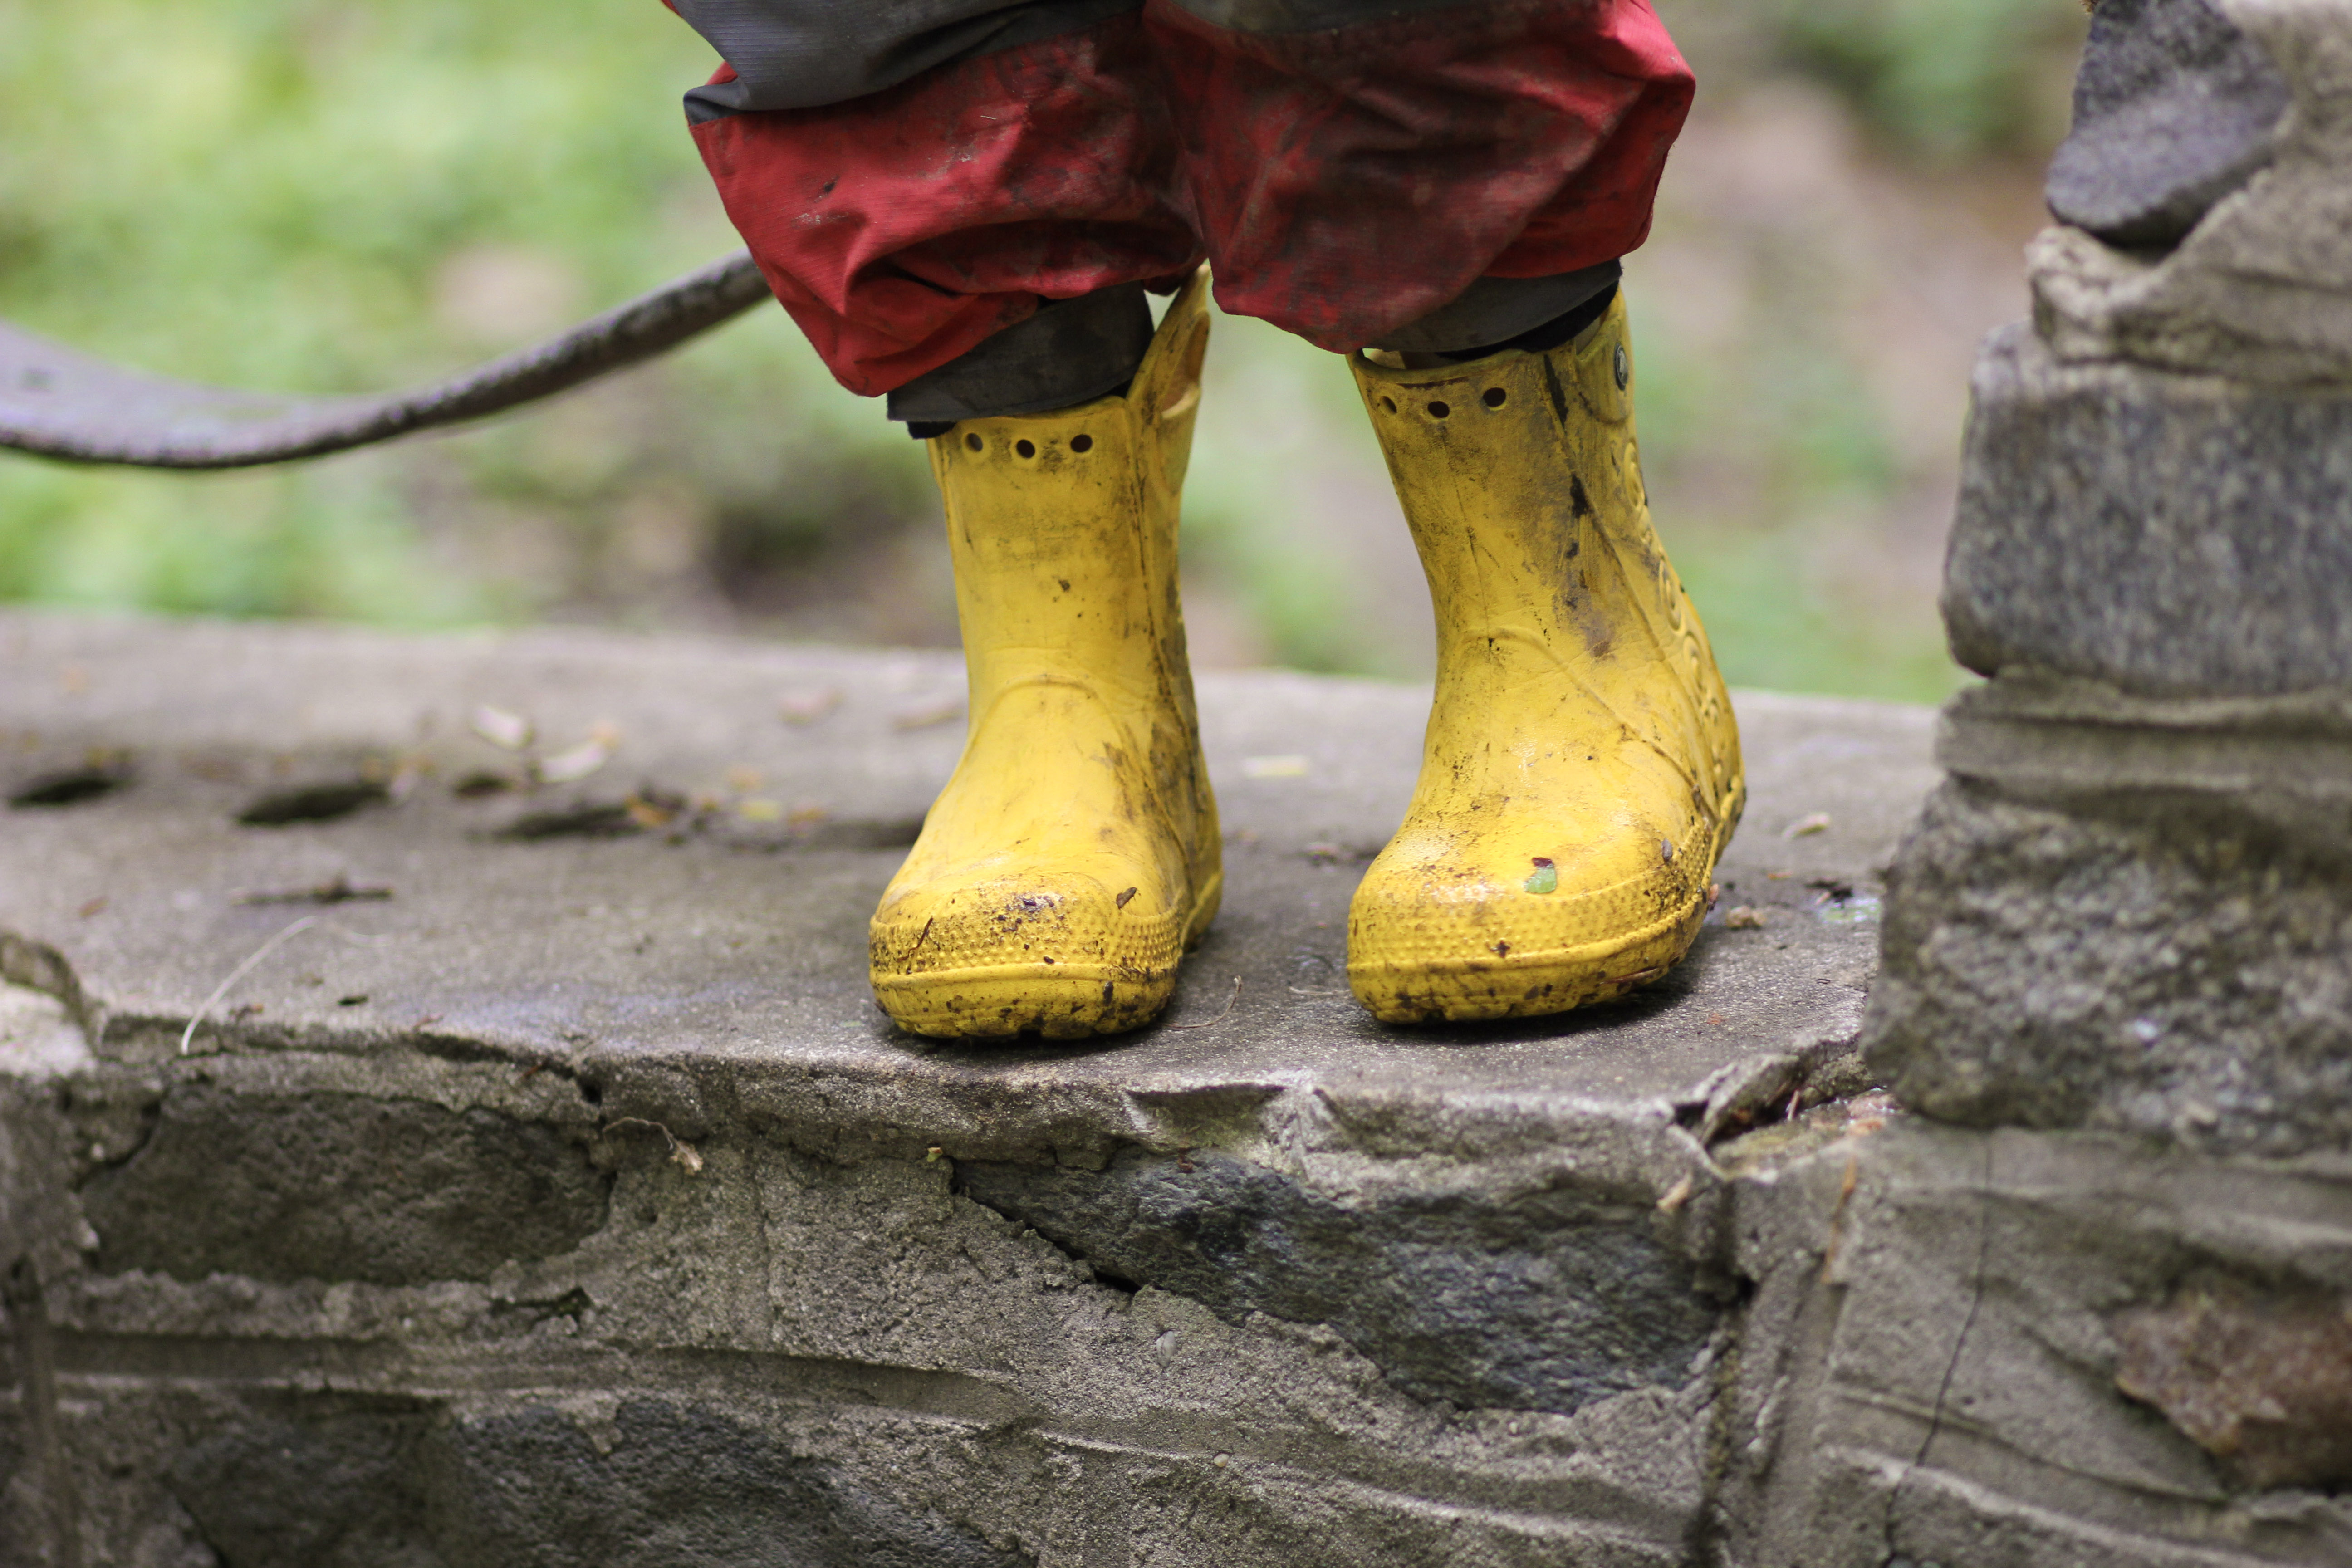  A child's feet in yellow rain boots.